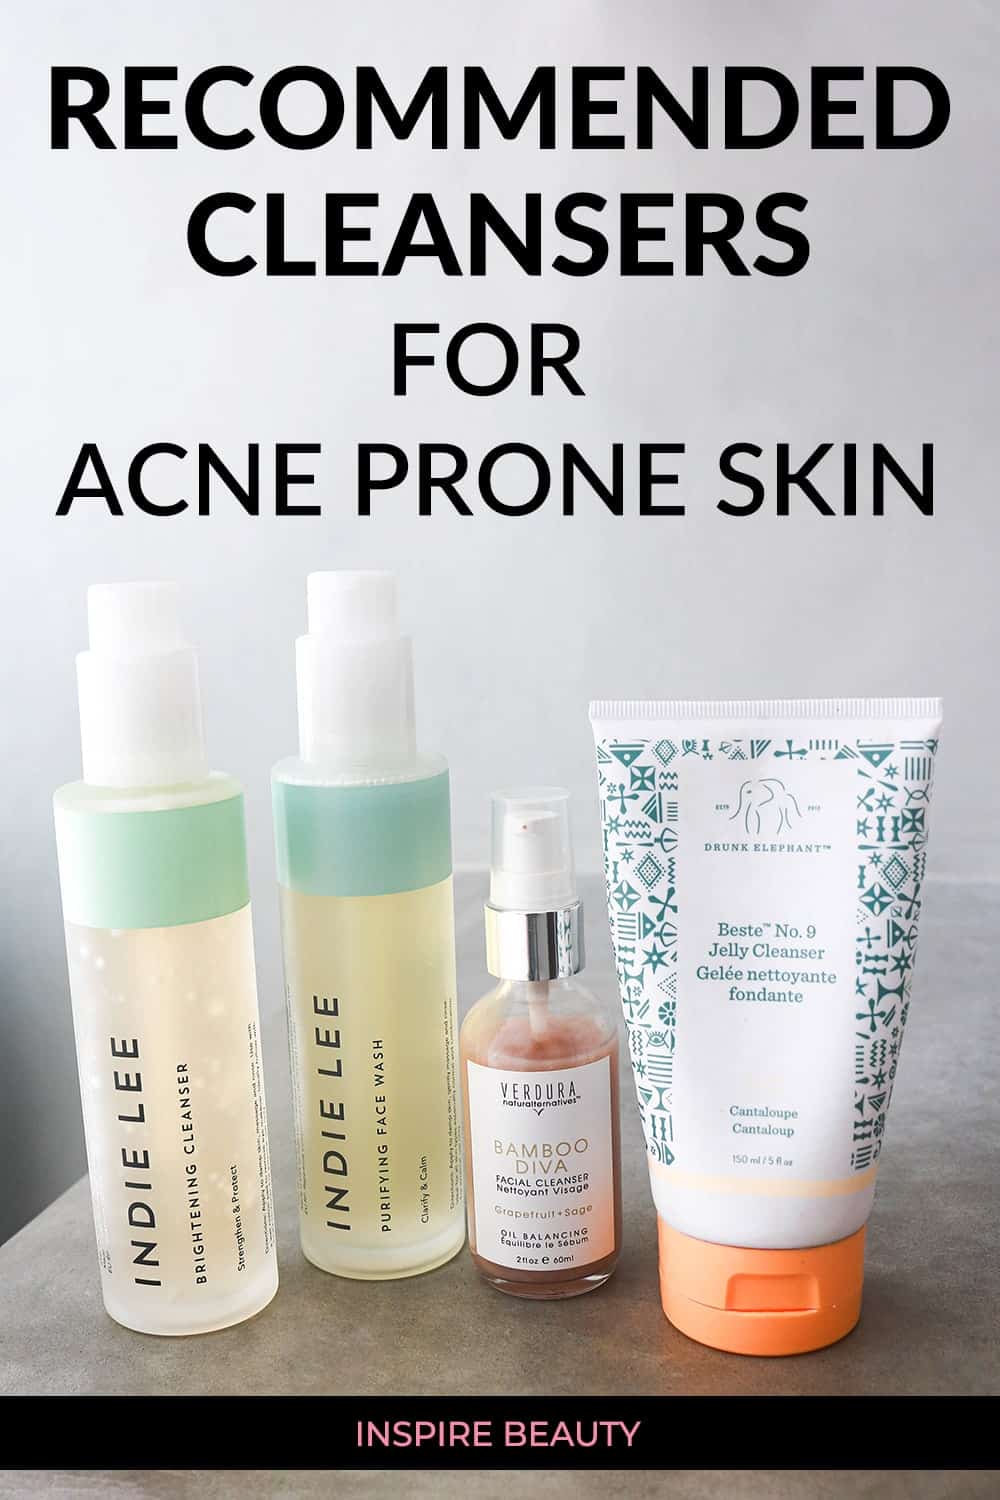 Recommended clean beauty cleansers for acne: Indie Lee Purifying Face Wash, Indie Lee Brightening Cleanser, Verdura naturalternatives Bamboo Diva Cleanser, Drunk Elephant Beste No9 Jelly Cleanser, Oskia Renaissance Cleansing Gel